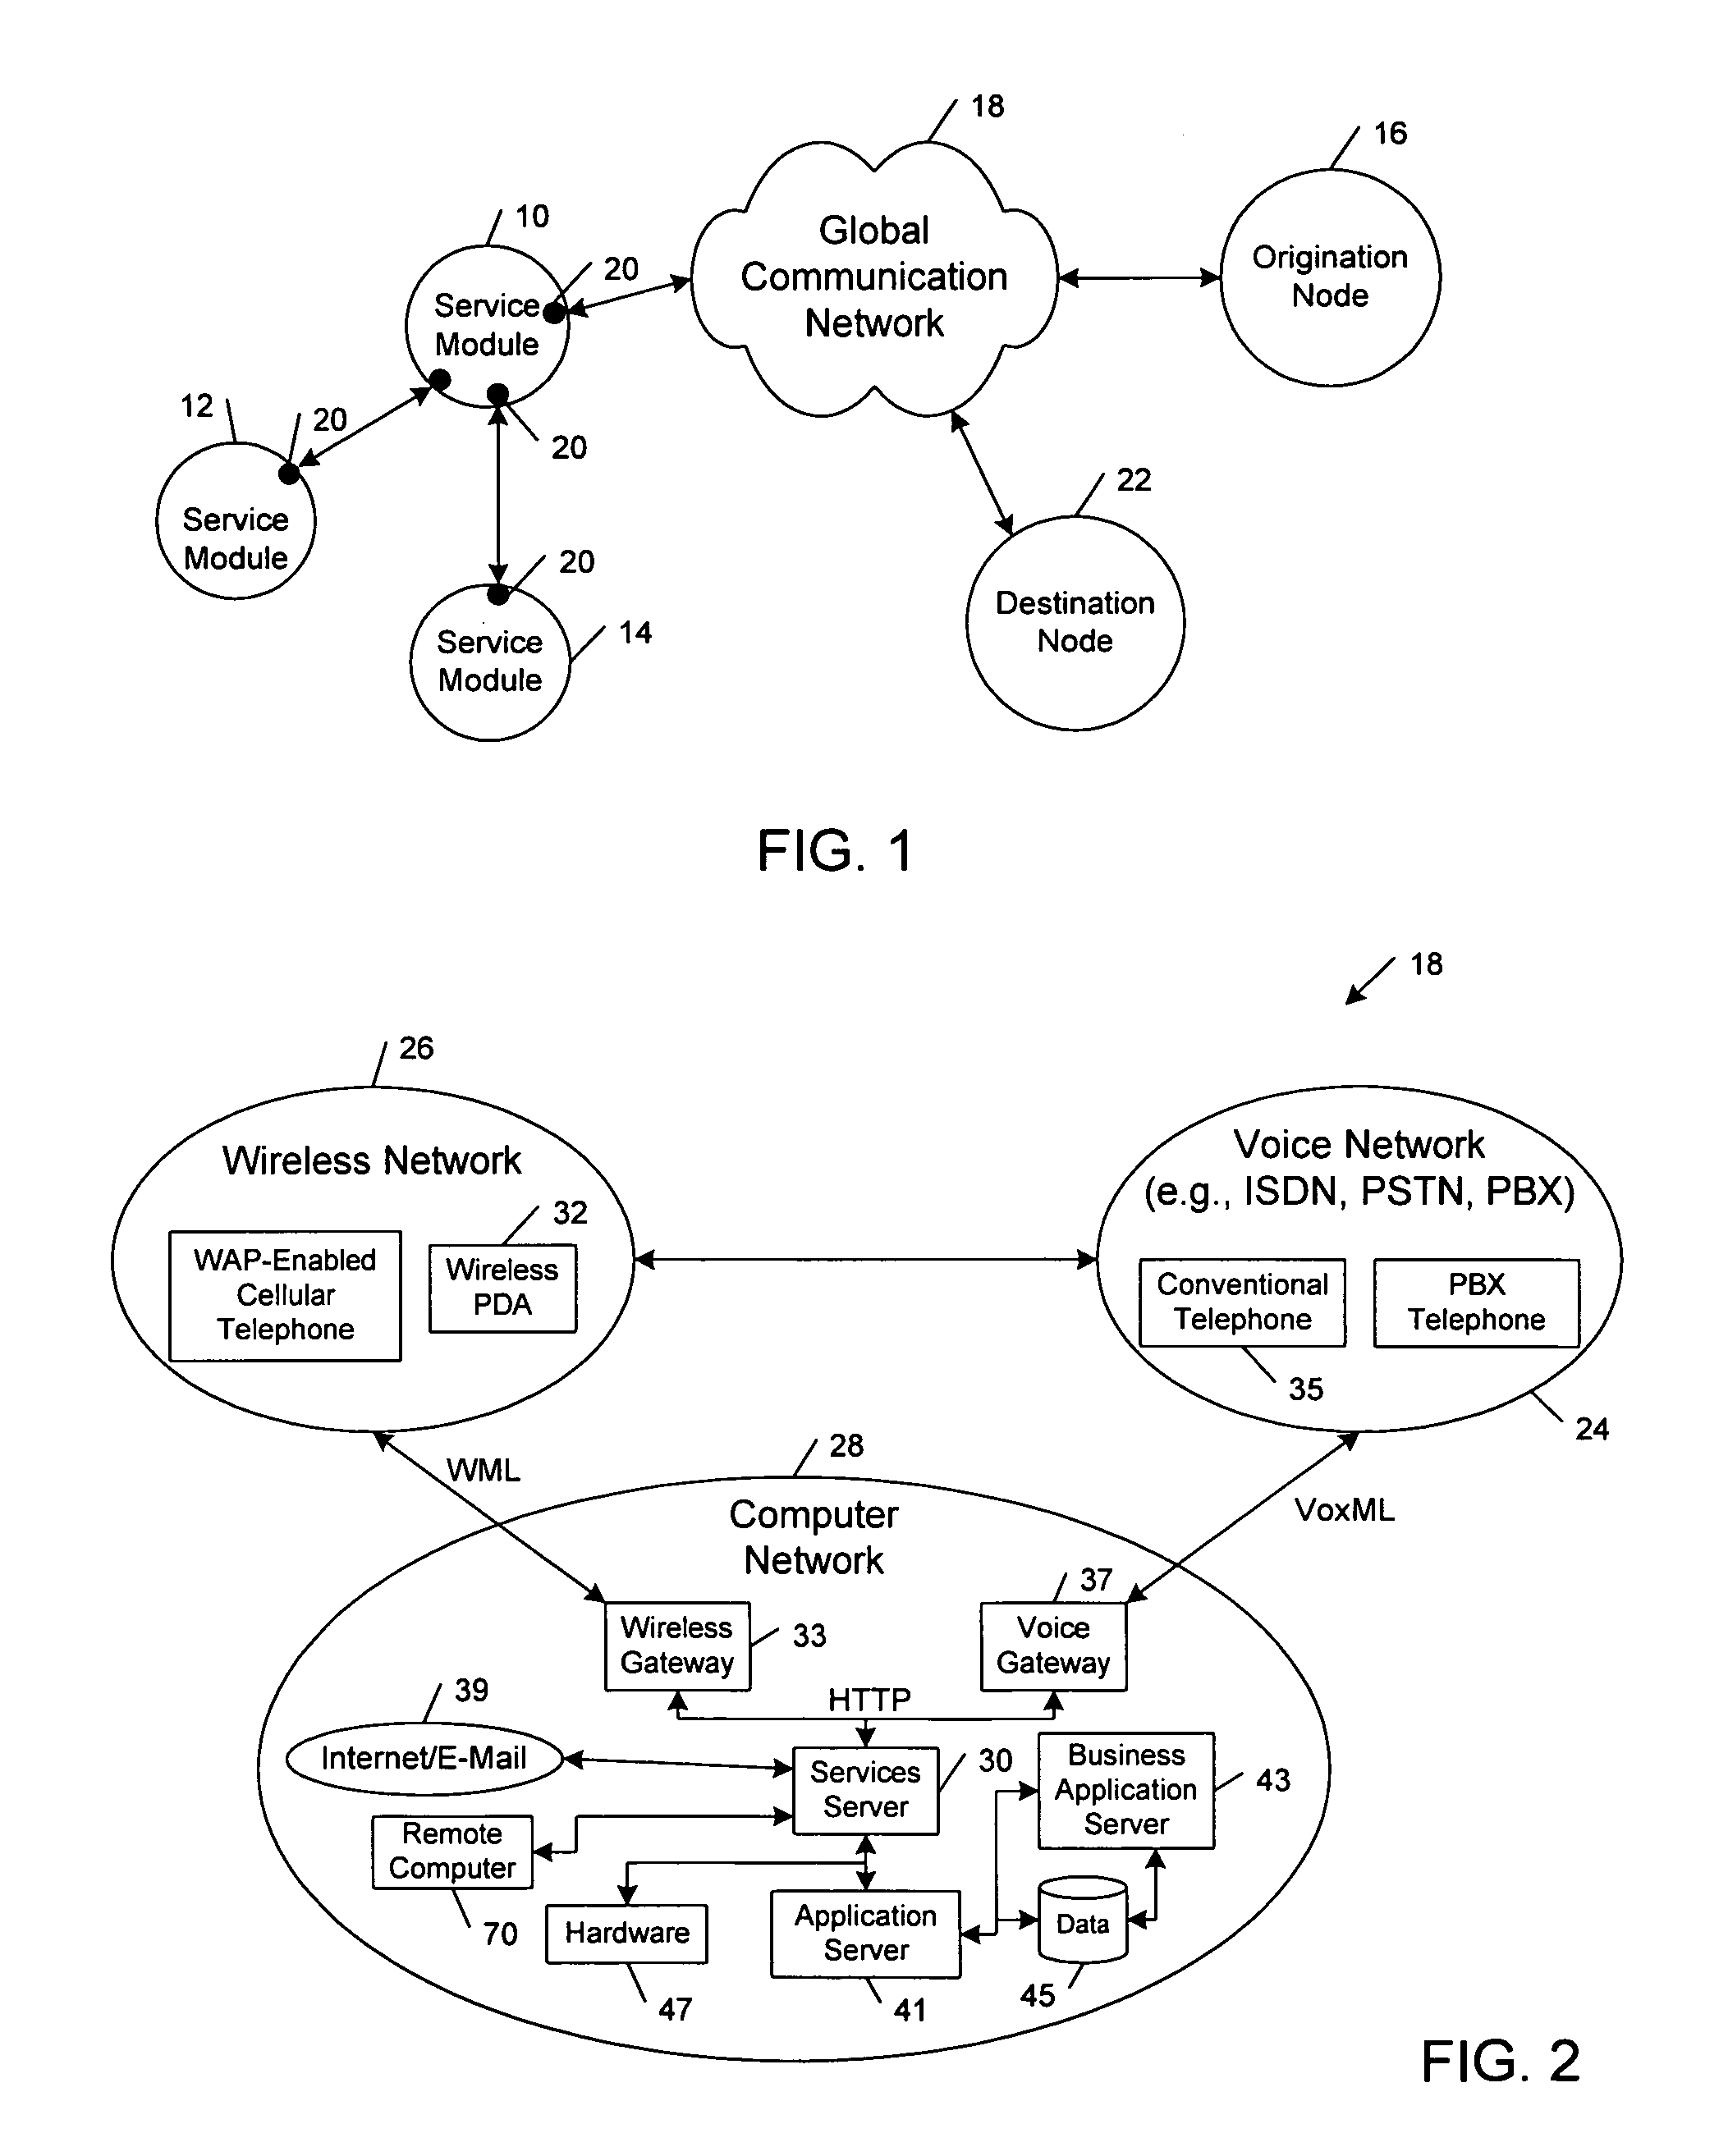 Distributed universal communication module for facilitating delivery of network services to one or more devices communicating over multiple transport facilities